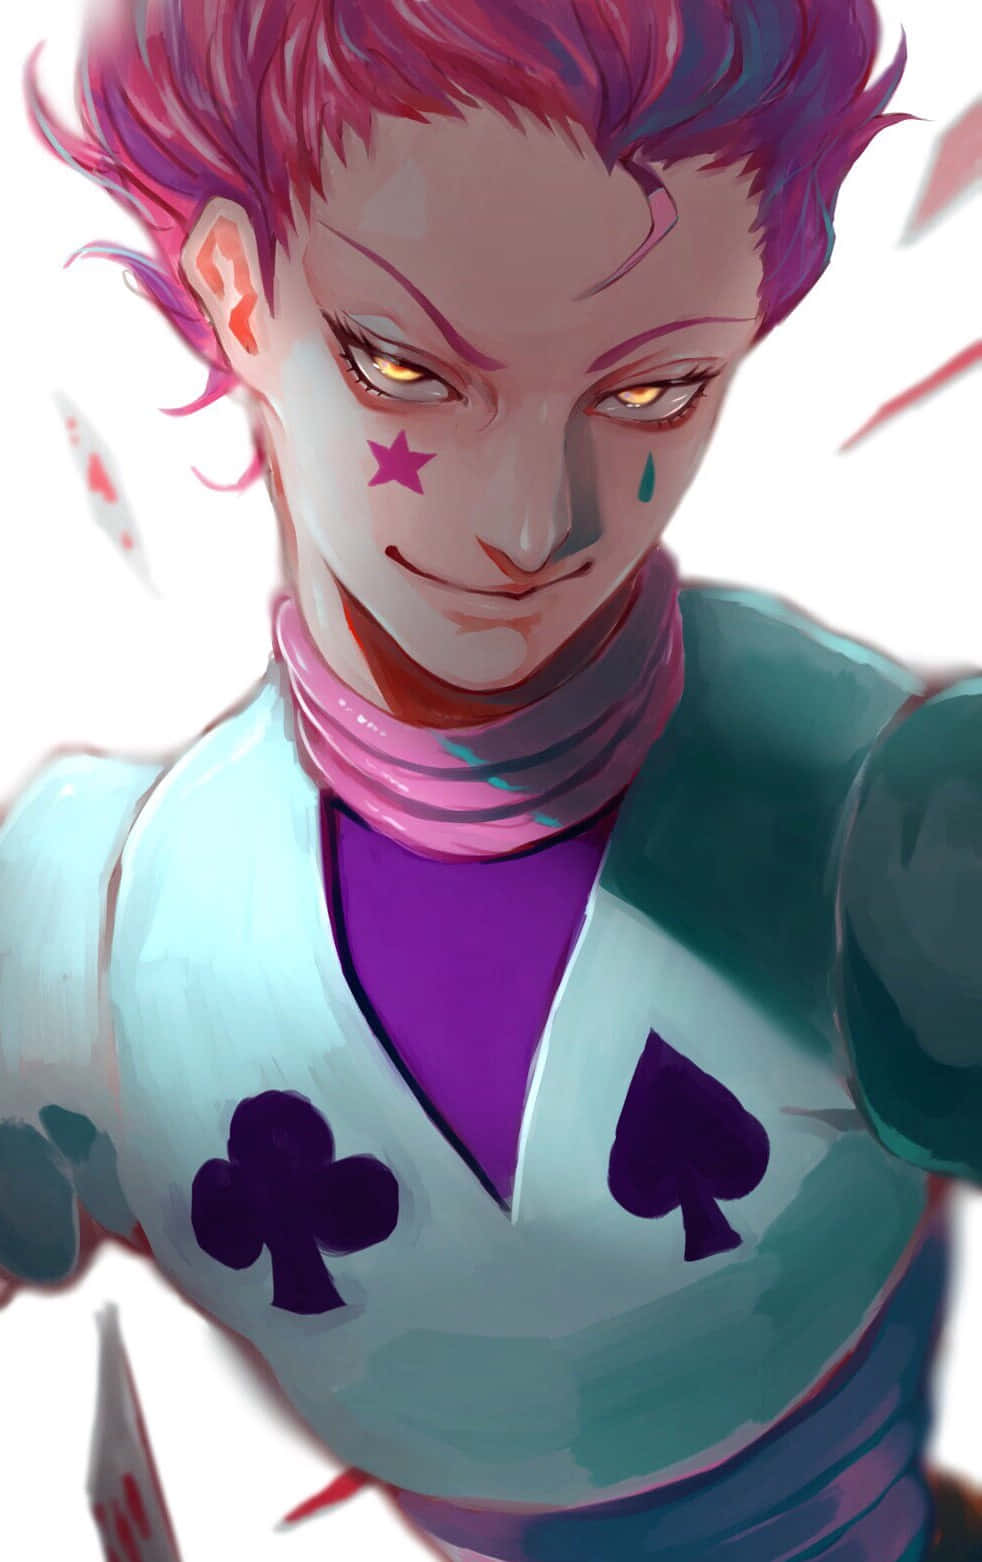 Outlandish and Strong, Hisoka, the Wrestler from Hunter x Hunter Unfolds His Magical Abilities